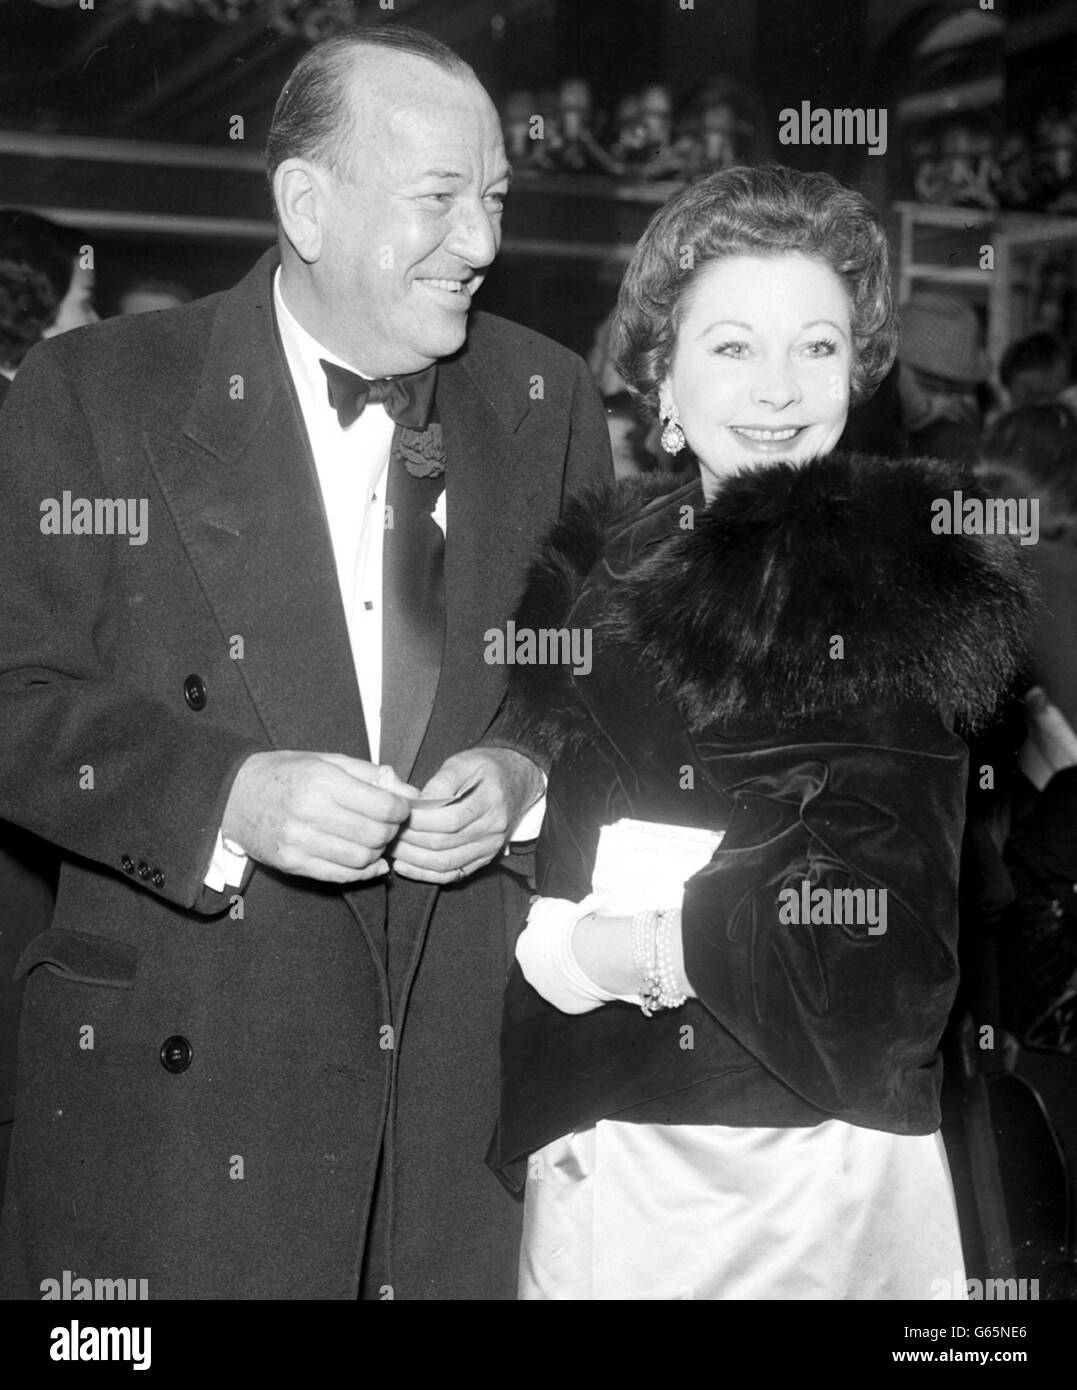 Noel Coward, who is celebrating his 59th birthday arrives with actress Vivien Leigh for the first night of 'Who's your father?' at the Cambridge Theatre, London. Stock Photo